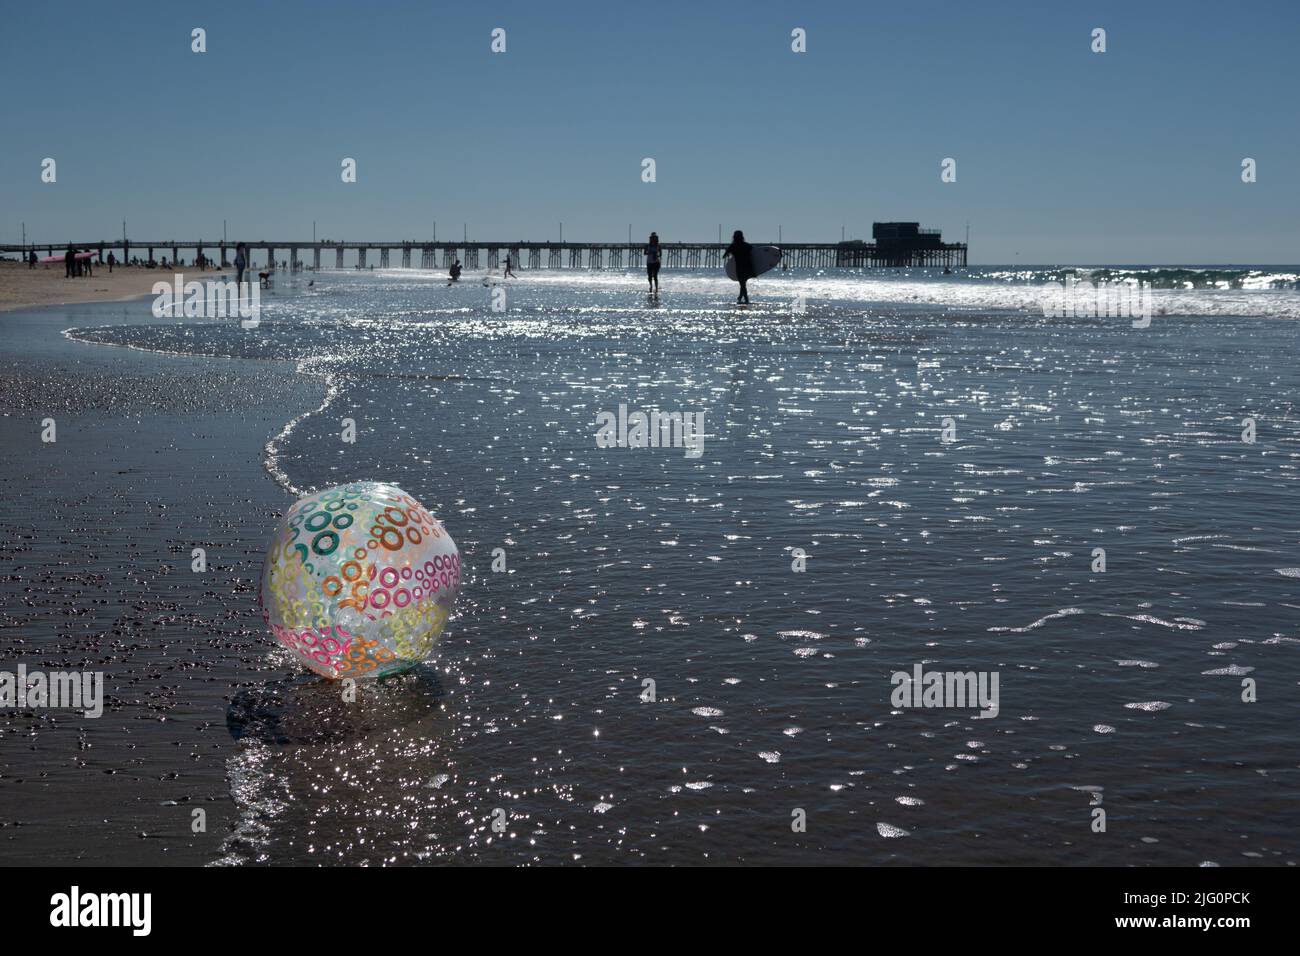 Large inflatable beach ball in foreground of newport beach pier with surfer walking along the beach Stock Photo